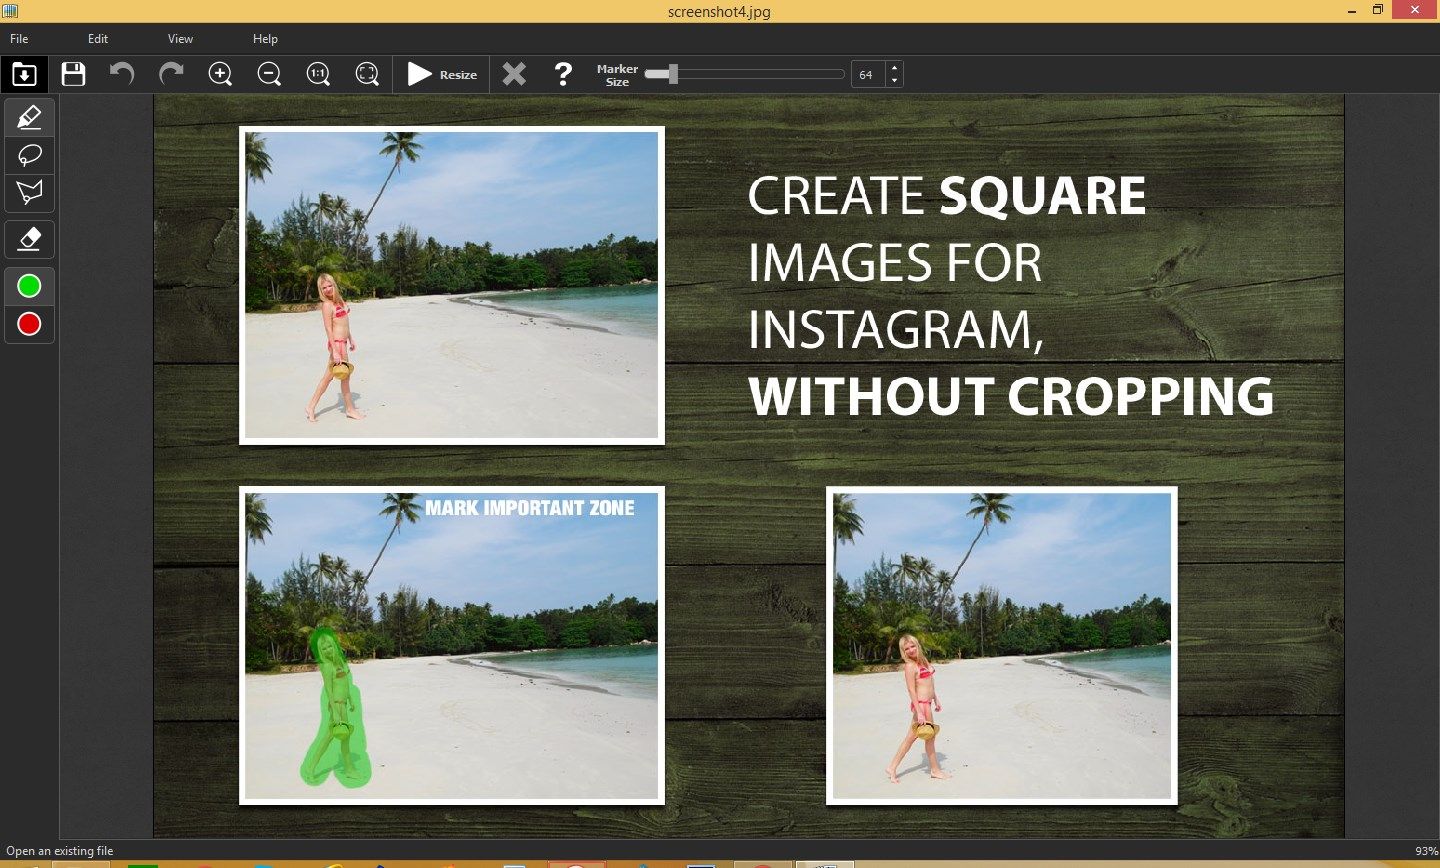 Create square images for Instagram without cropping!